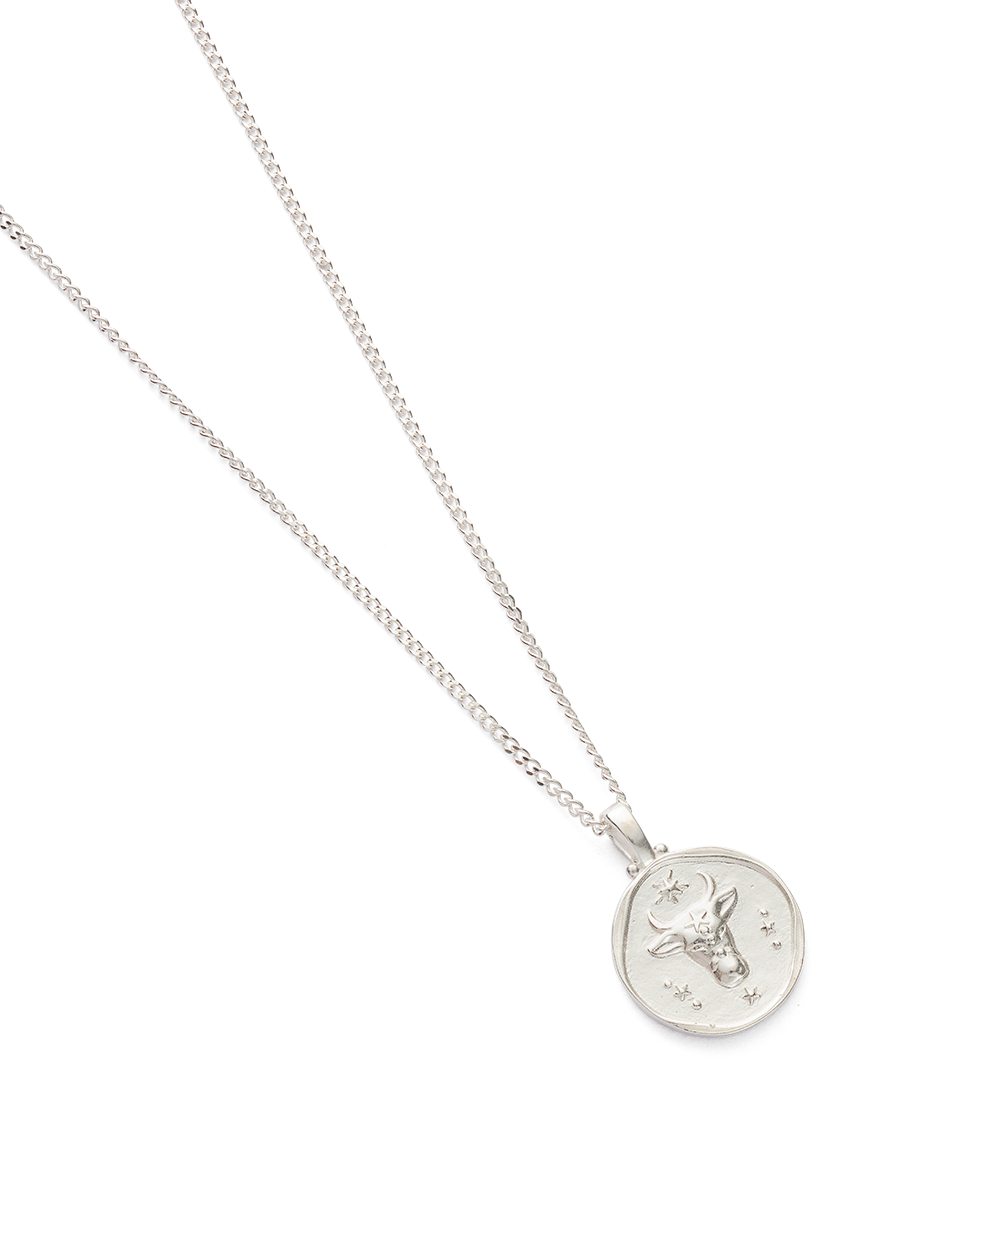 TAURUS ZODIAC NECKLACE (STERLING SILVER) - IMAGE 4